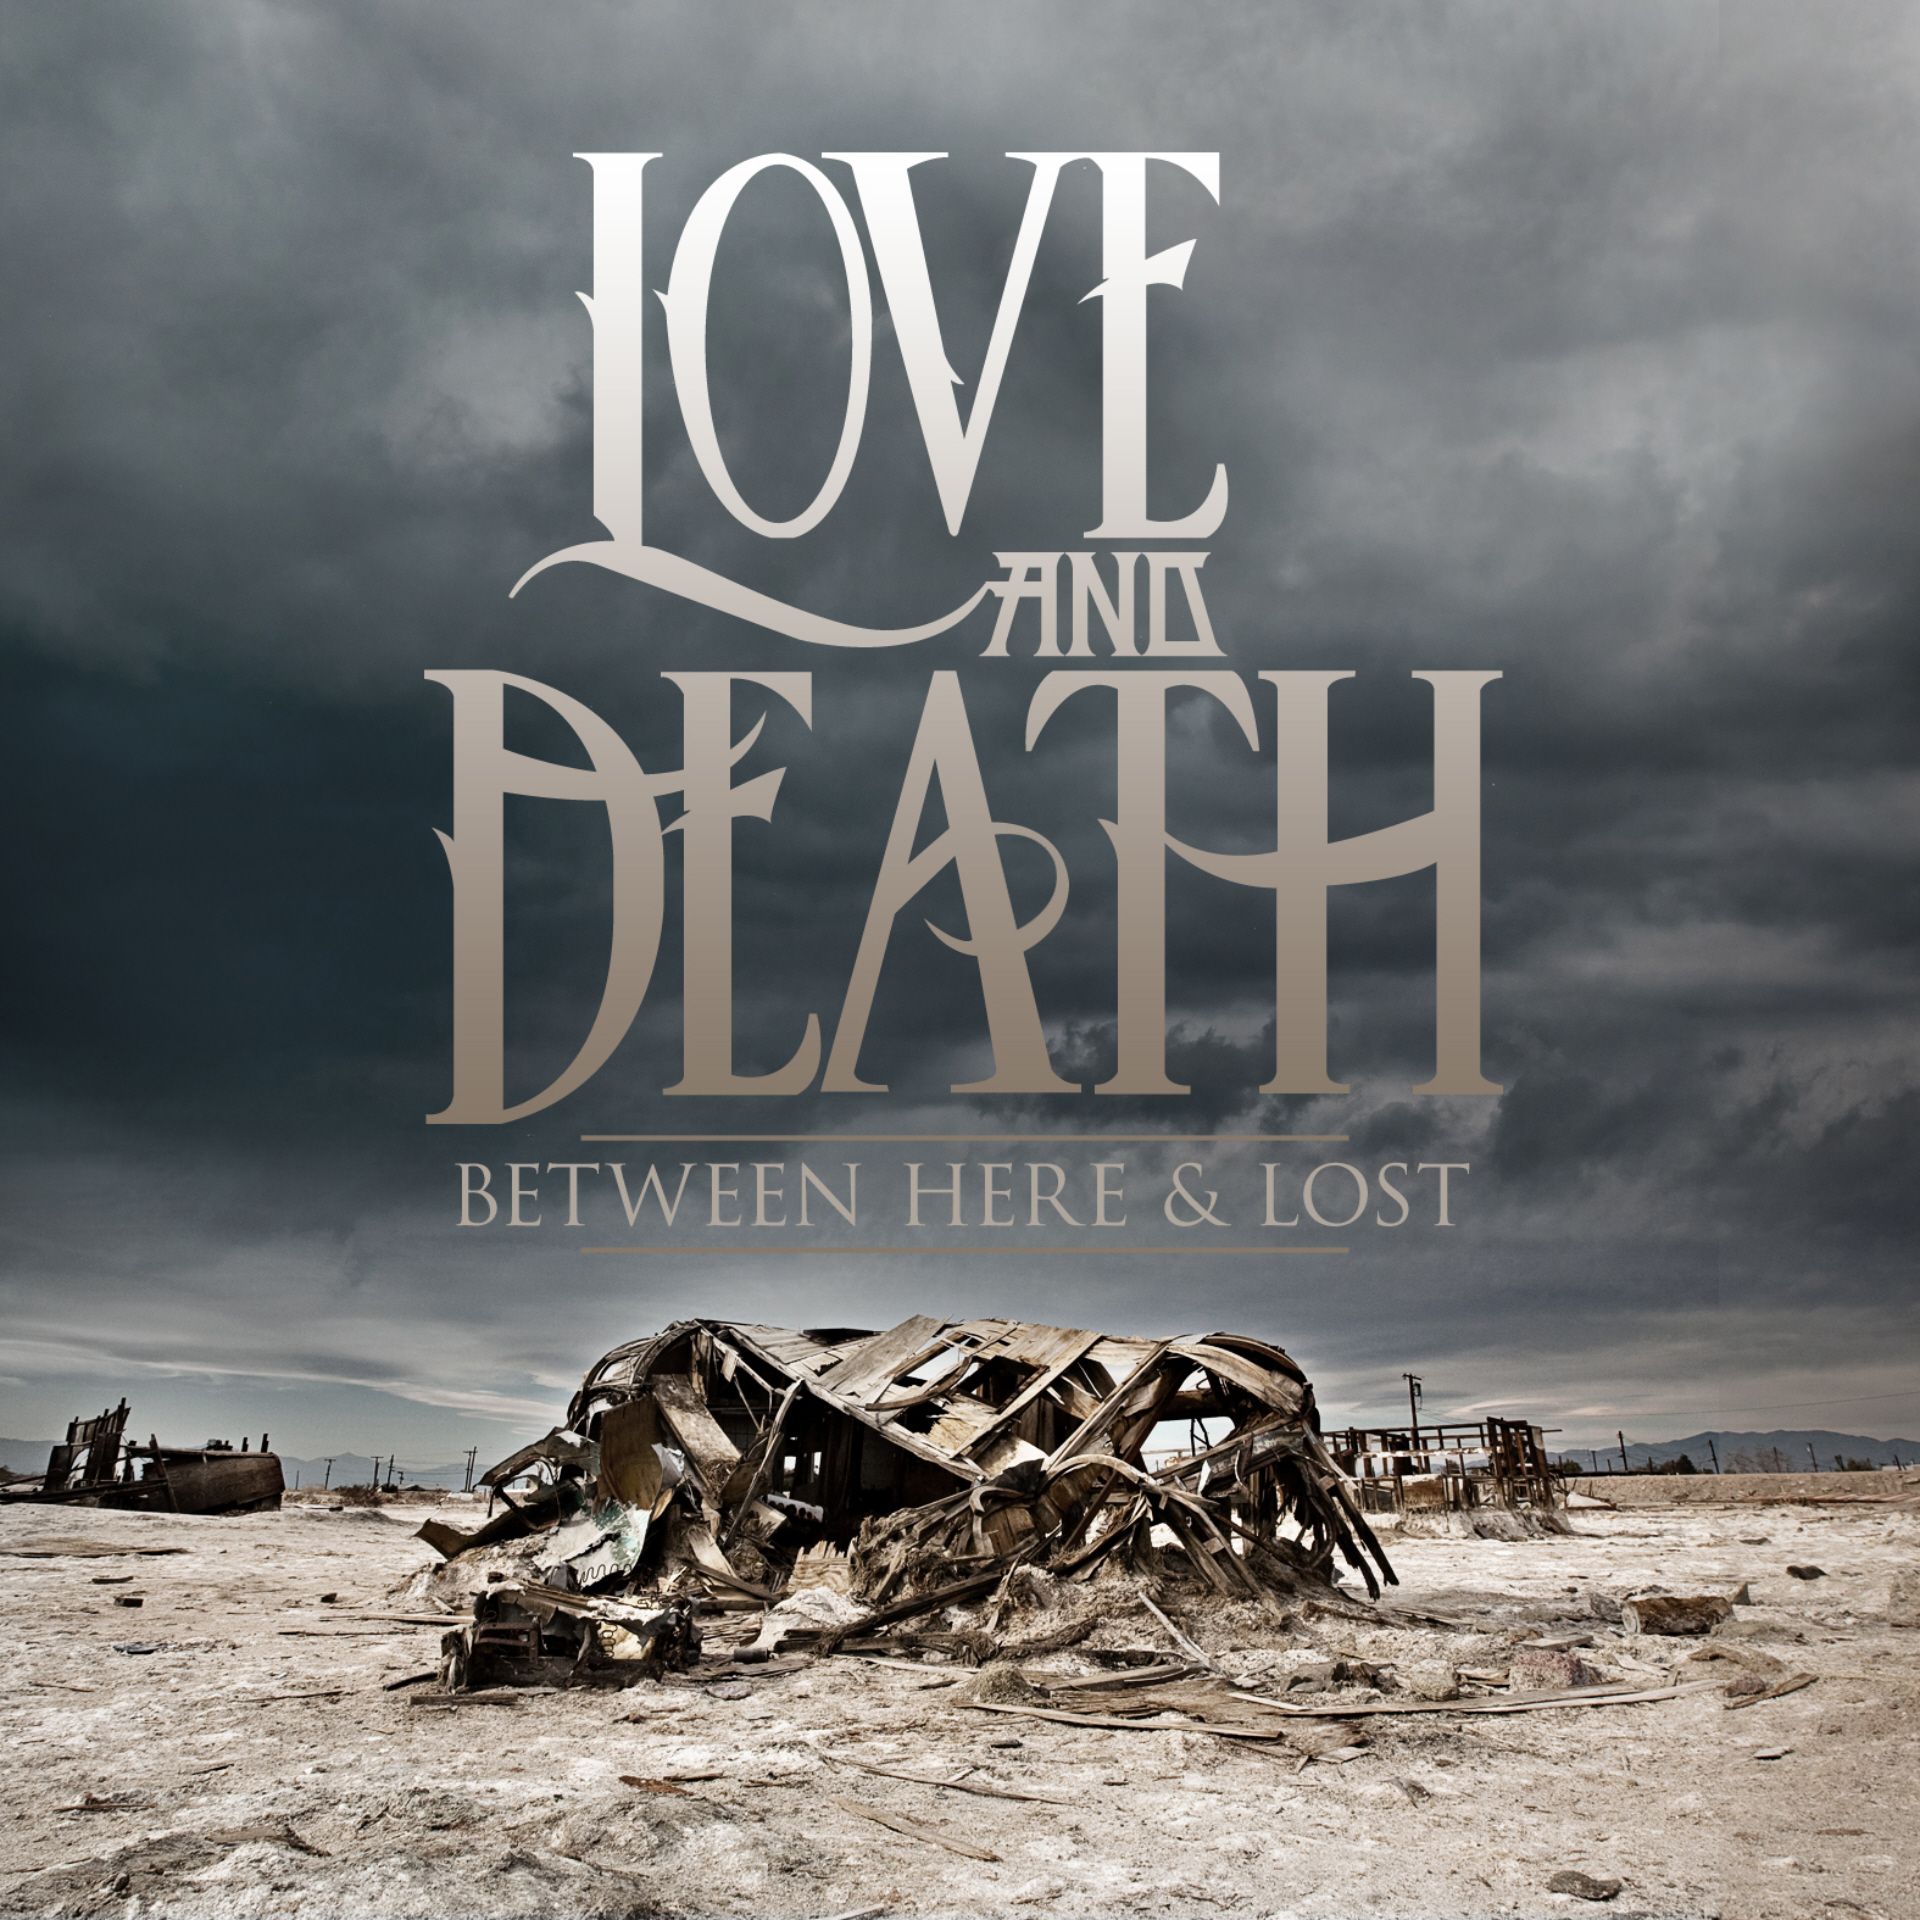 Love Is Death Wallpaper And Death Between Here And Lost HD Wallpaper